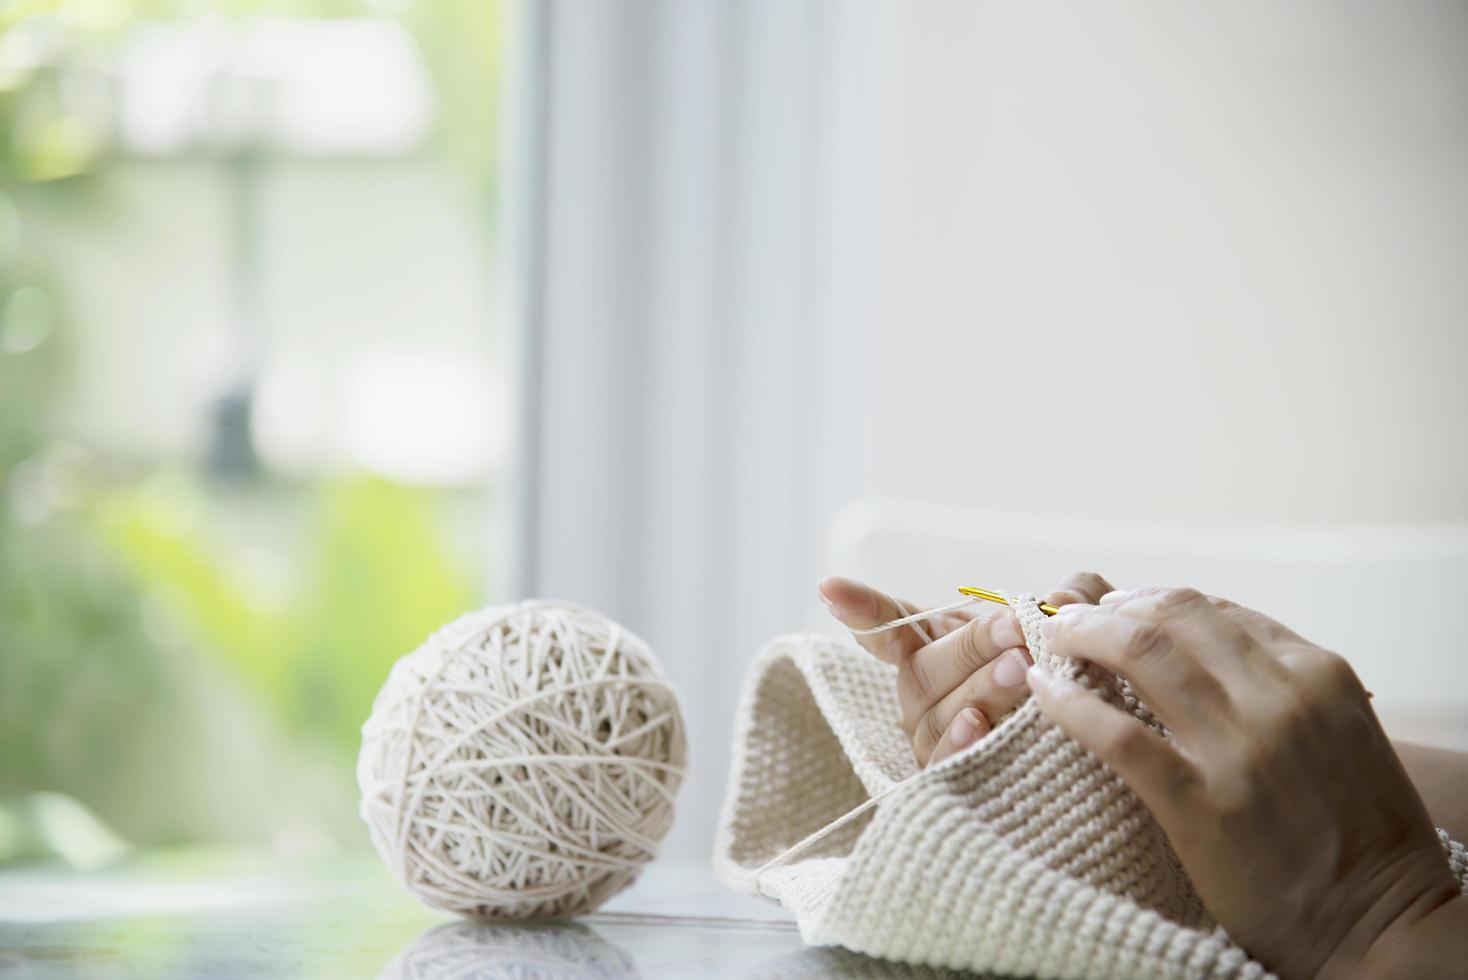 Woman's hands doing home knitting work - people with DIY work at home concept photo